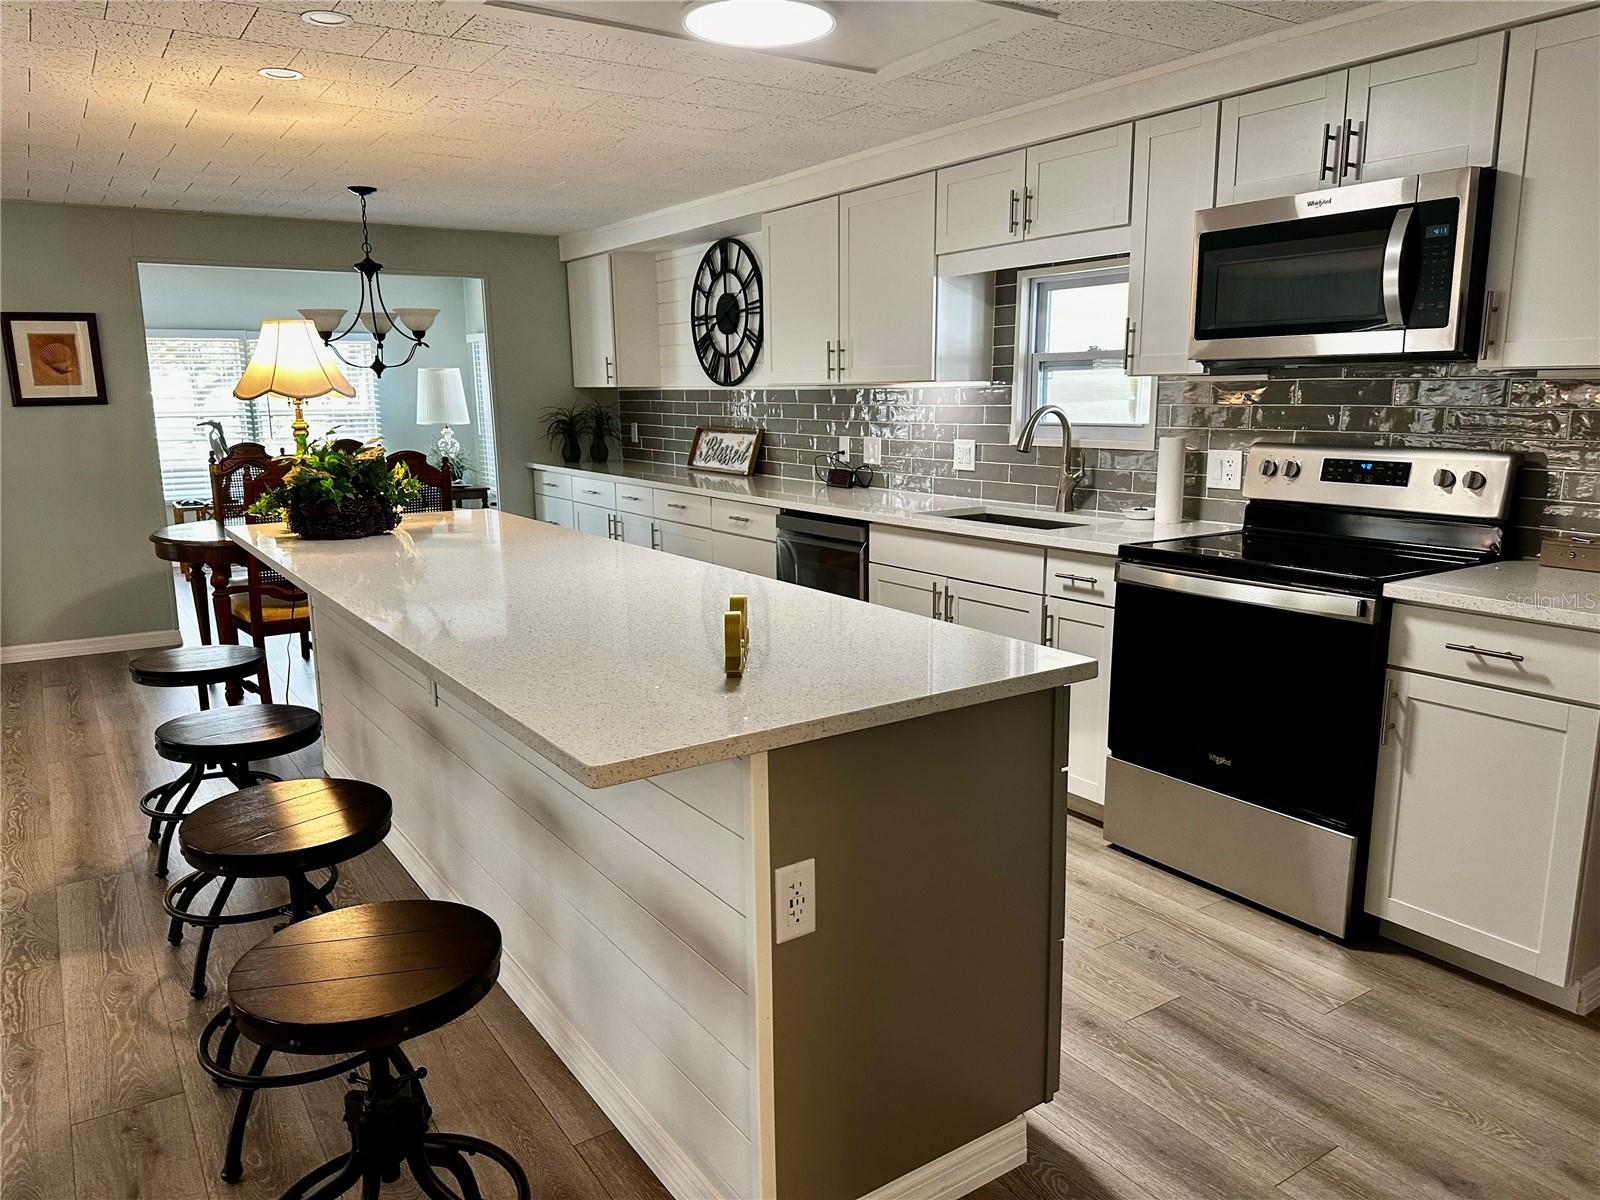 Massive island with Quartz counter top and barstool seating